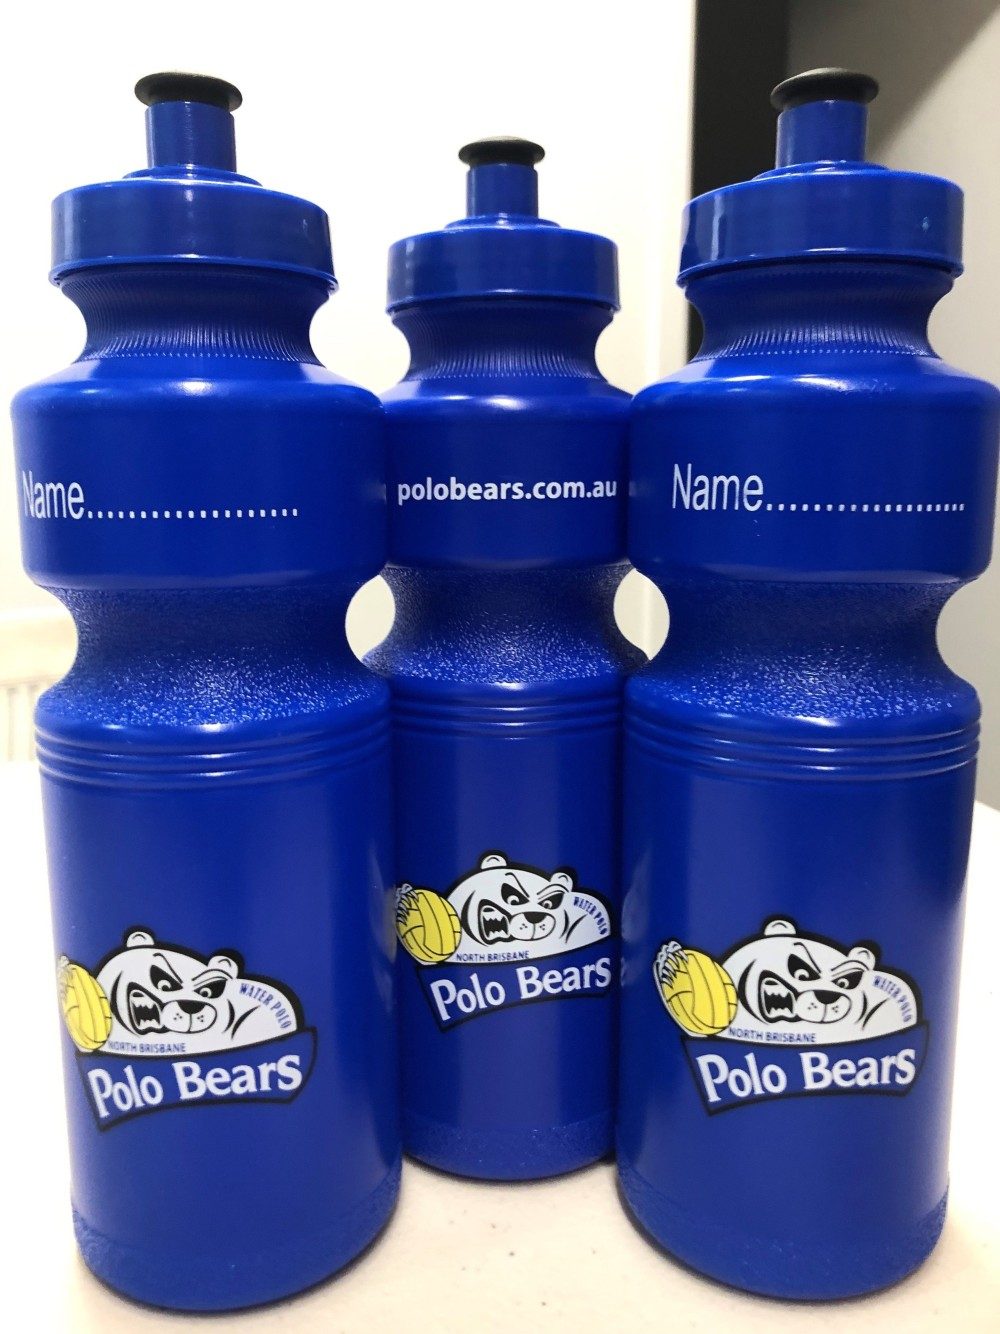 Polo Bears Waterbottle - Click to enlarge picture.